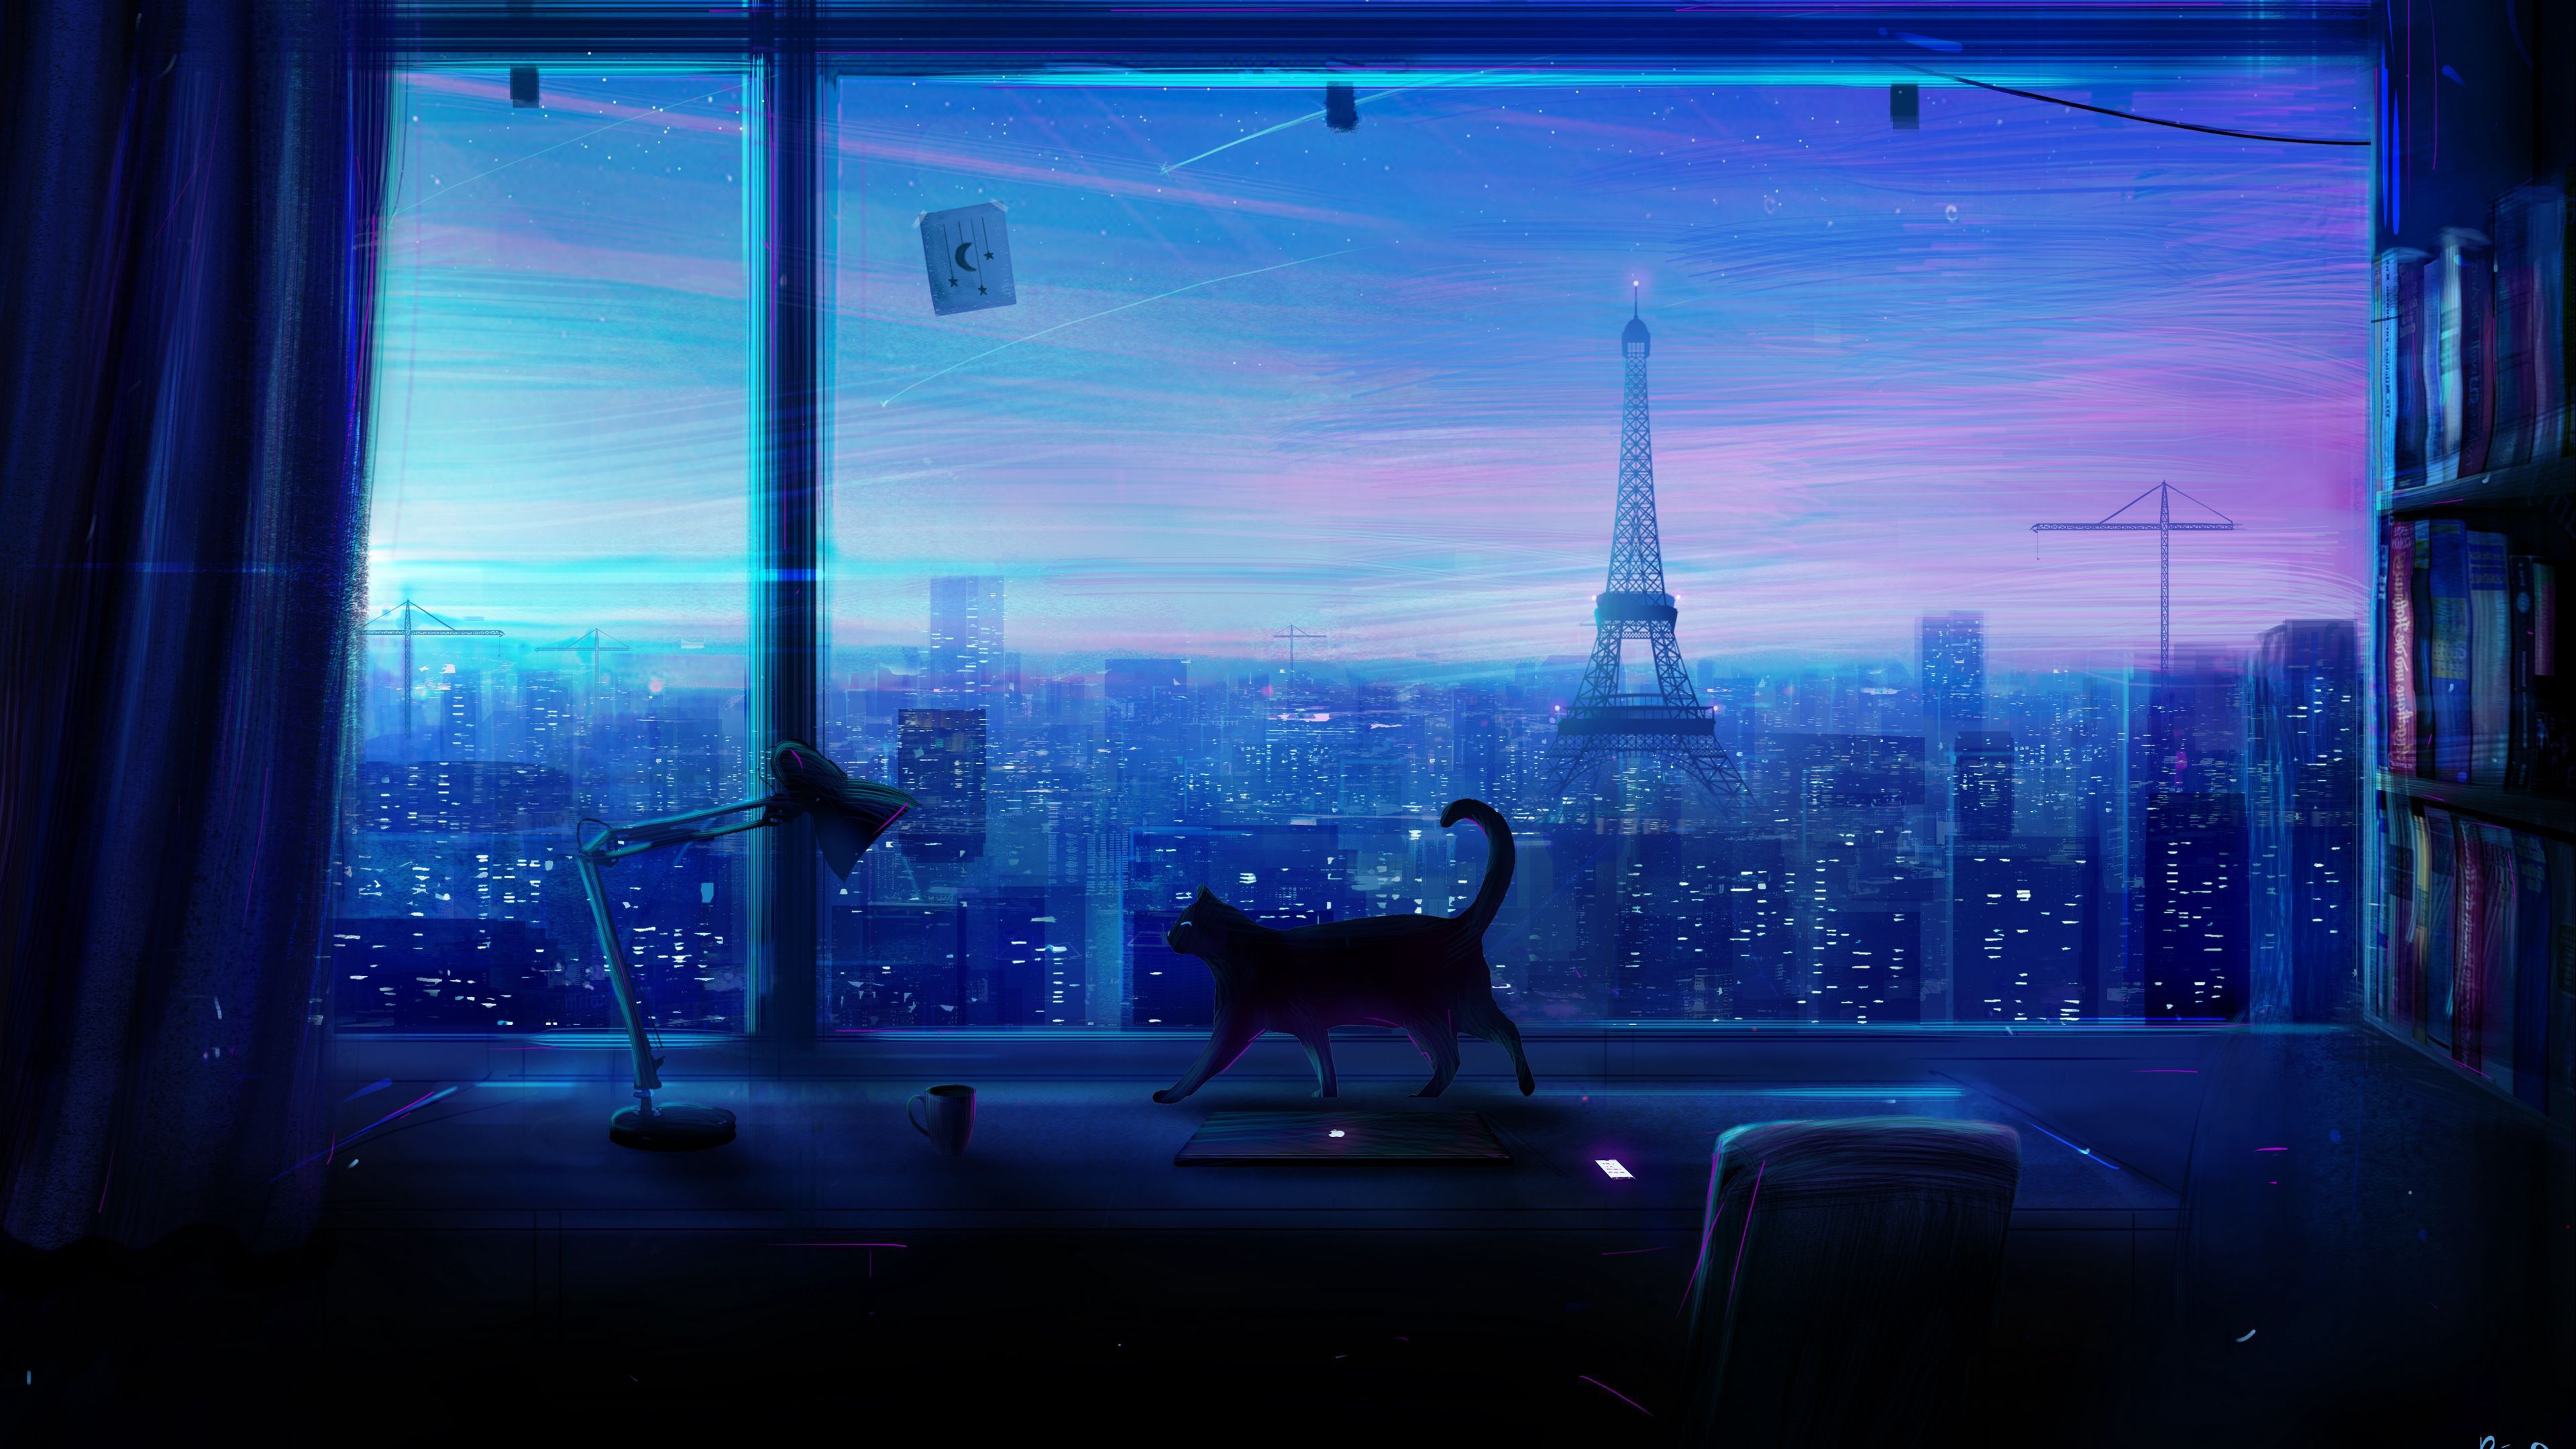 15 Greatest 4k wallpaper lofi You Can Download It At No Cost ...